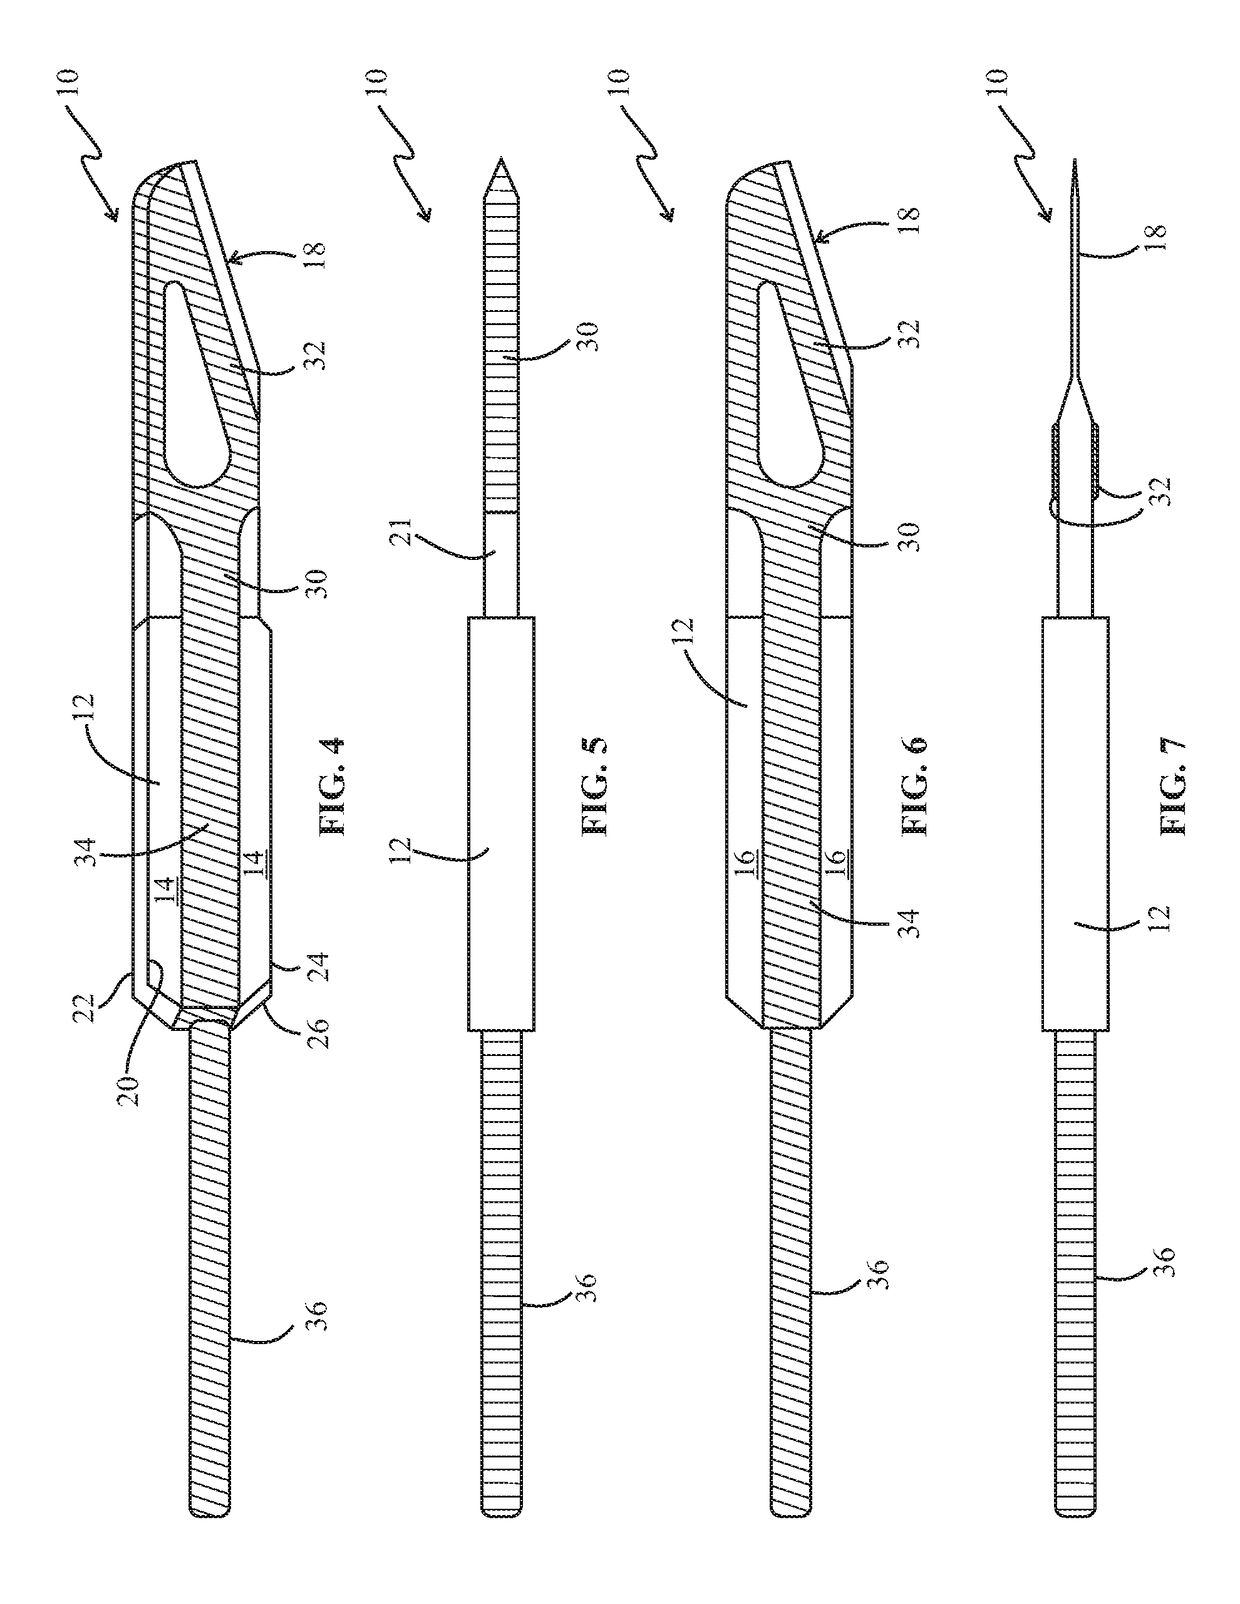 Monopolar electrosurgery blade and electrosurgery blade assembly